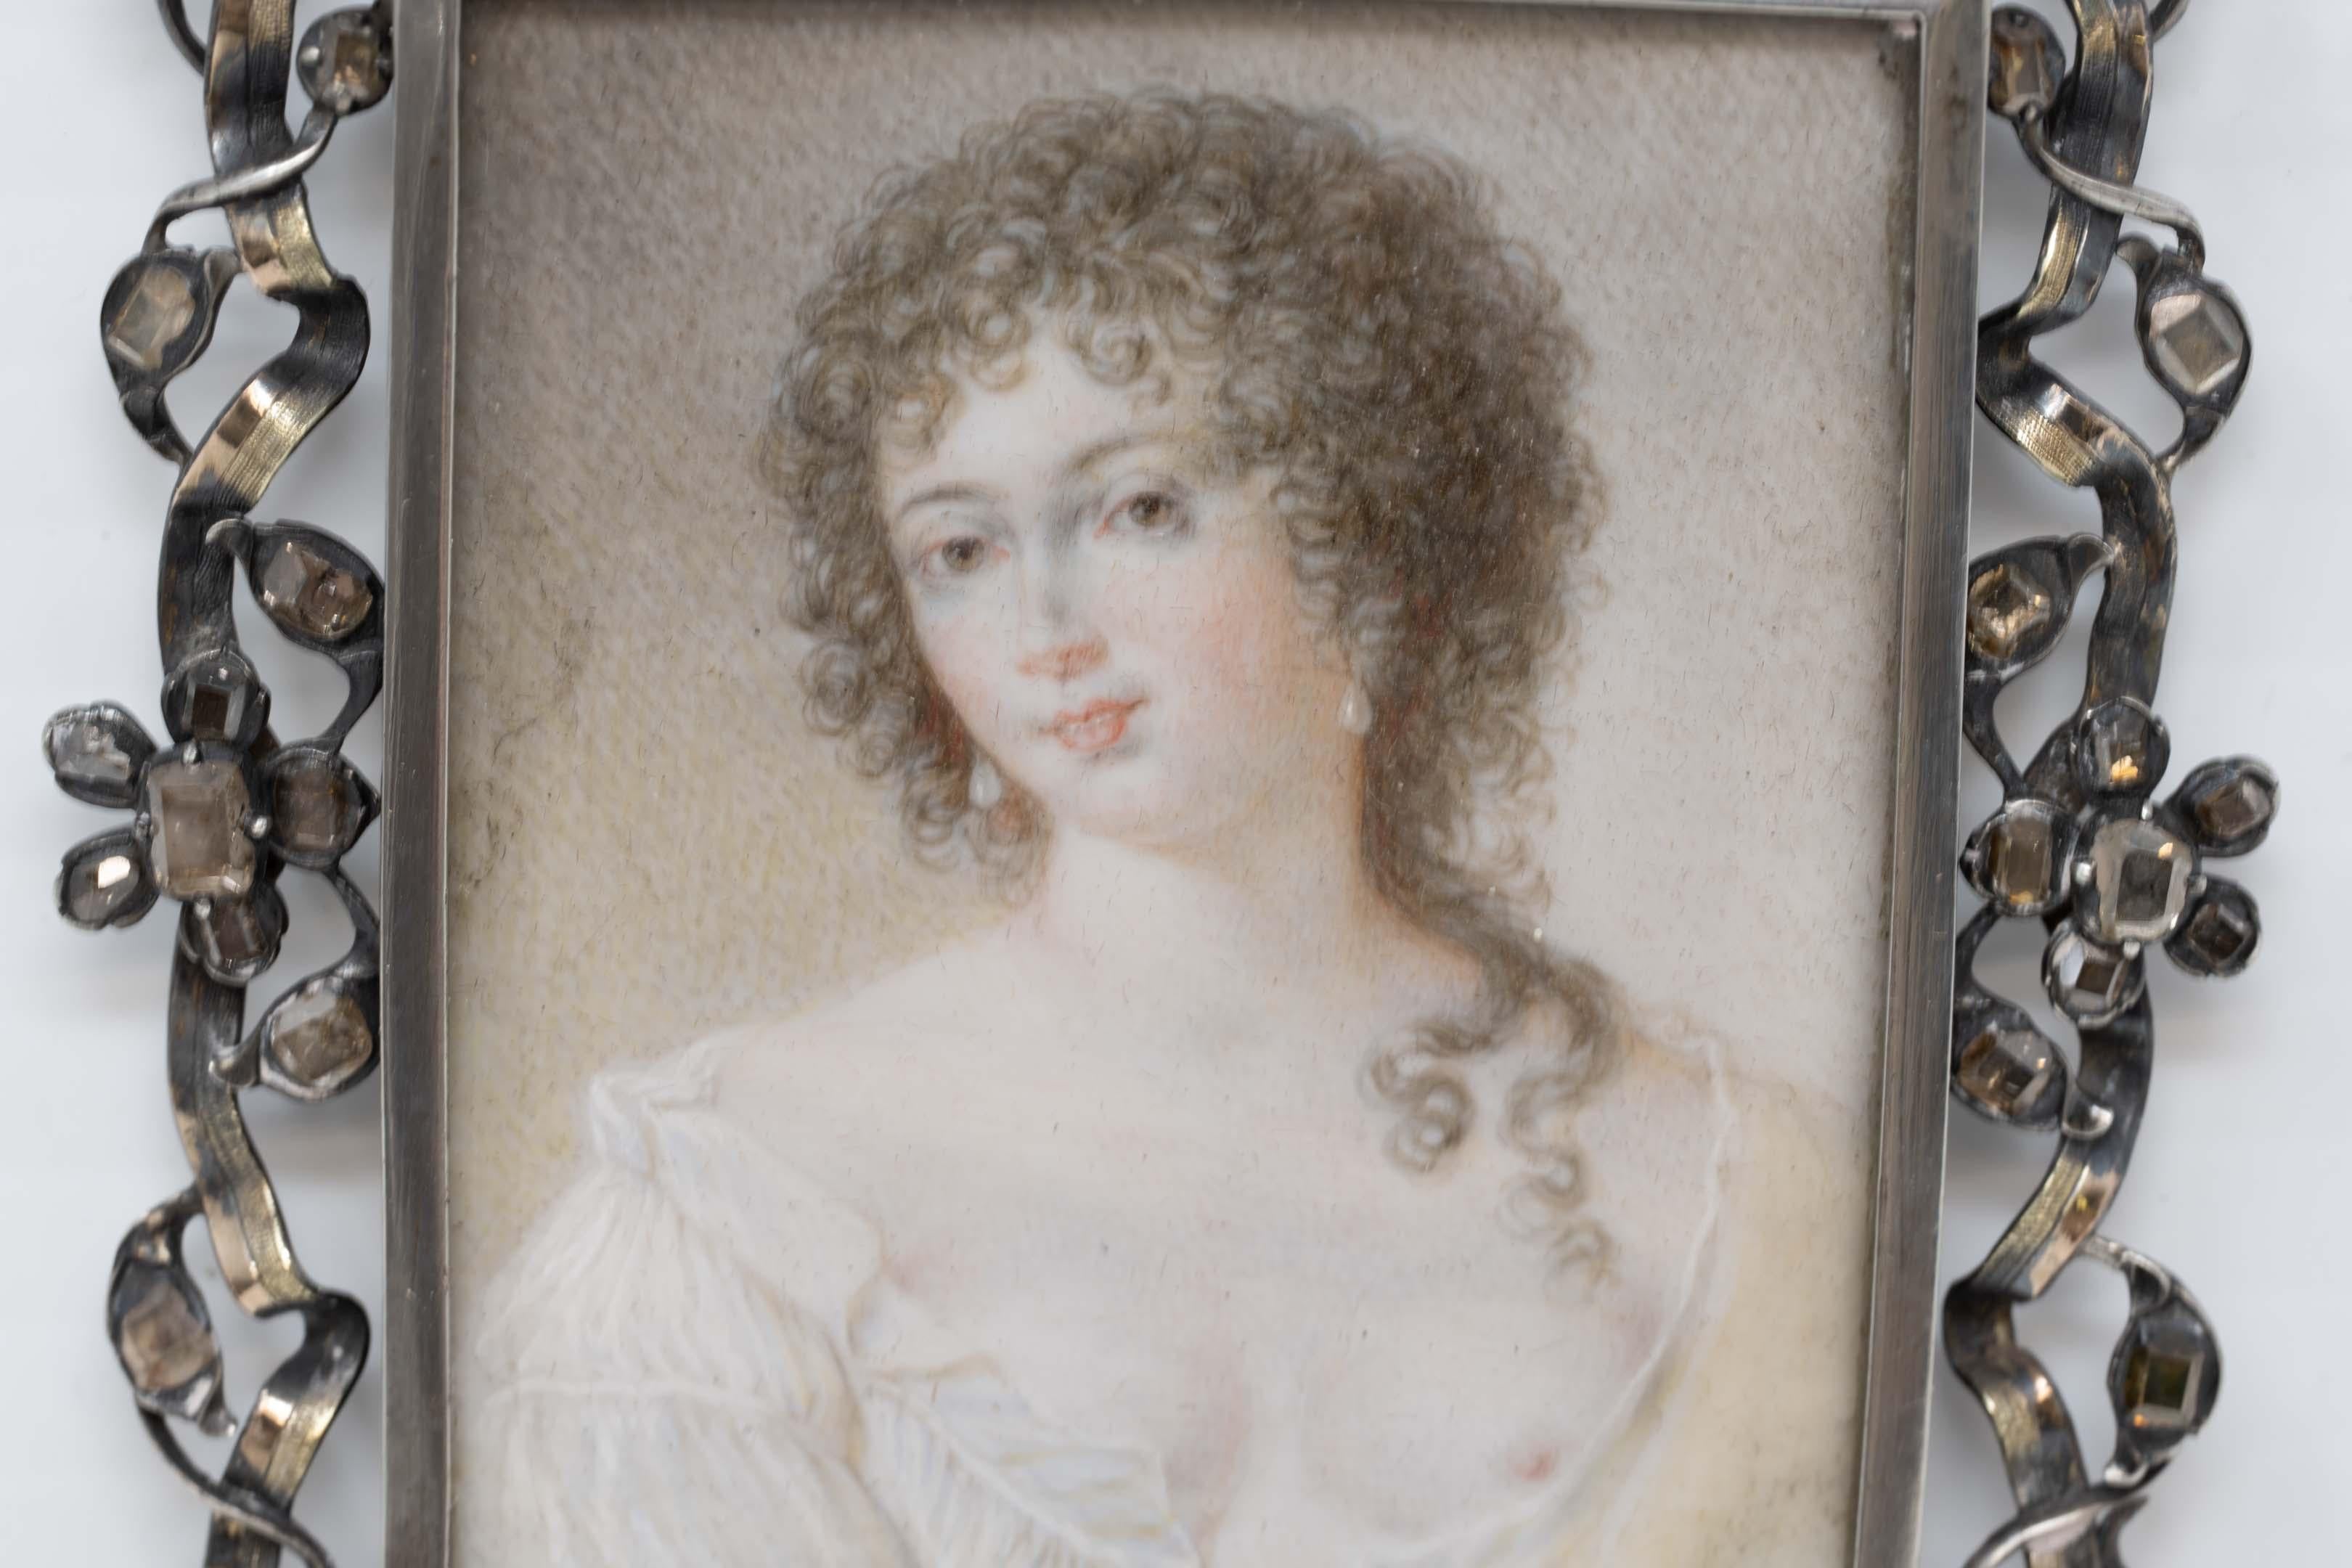 Antique 18th-century handpainted miniature portrait of a young lady in a solid silver frame surrounded by square, rectangular and old mine cut crystals (one is missing or broken). The miniature is not signed. Measures 58mm x 47 mm, and the frame